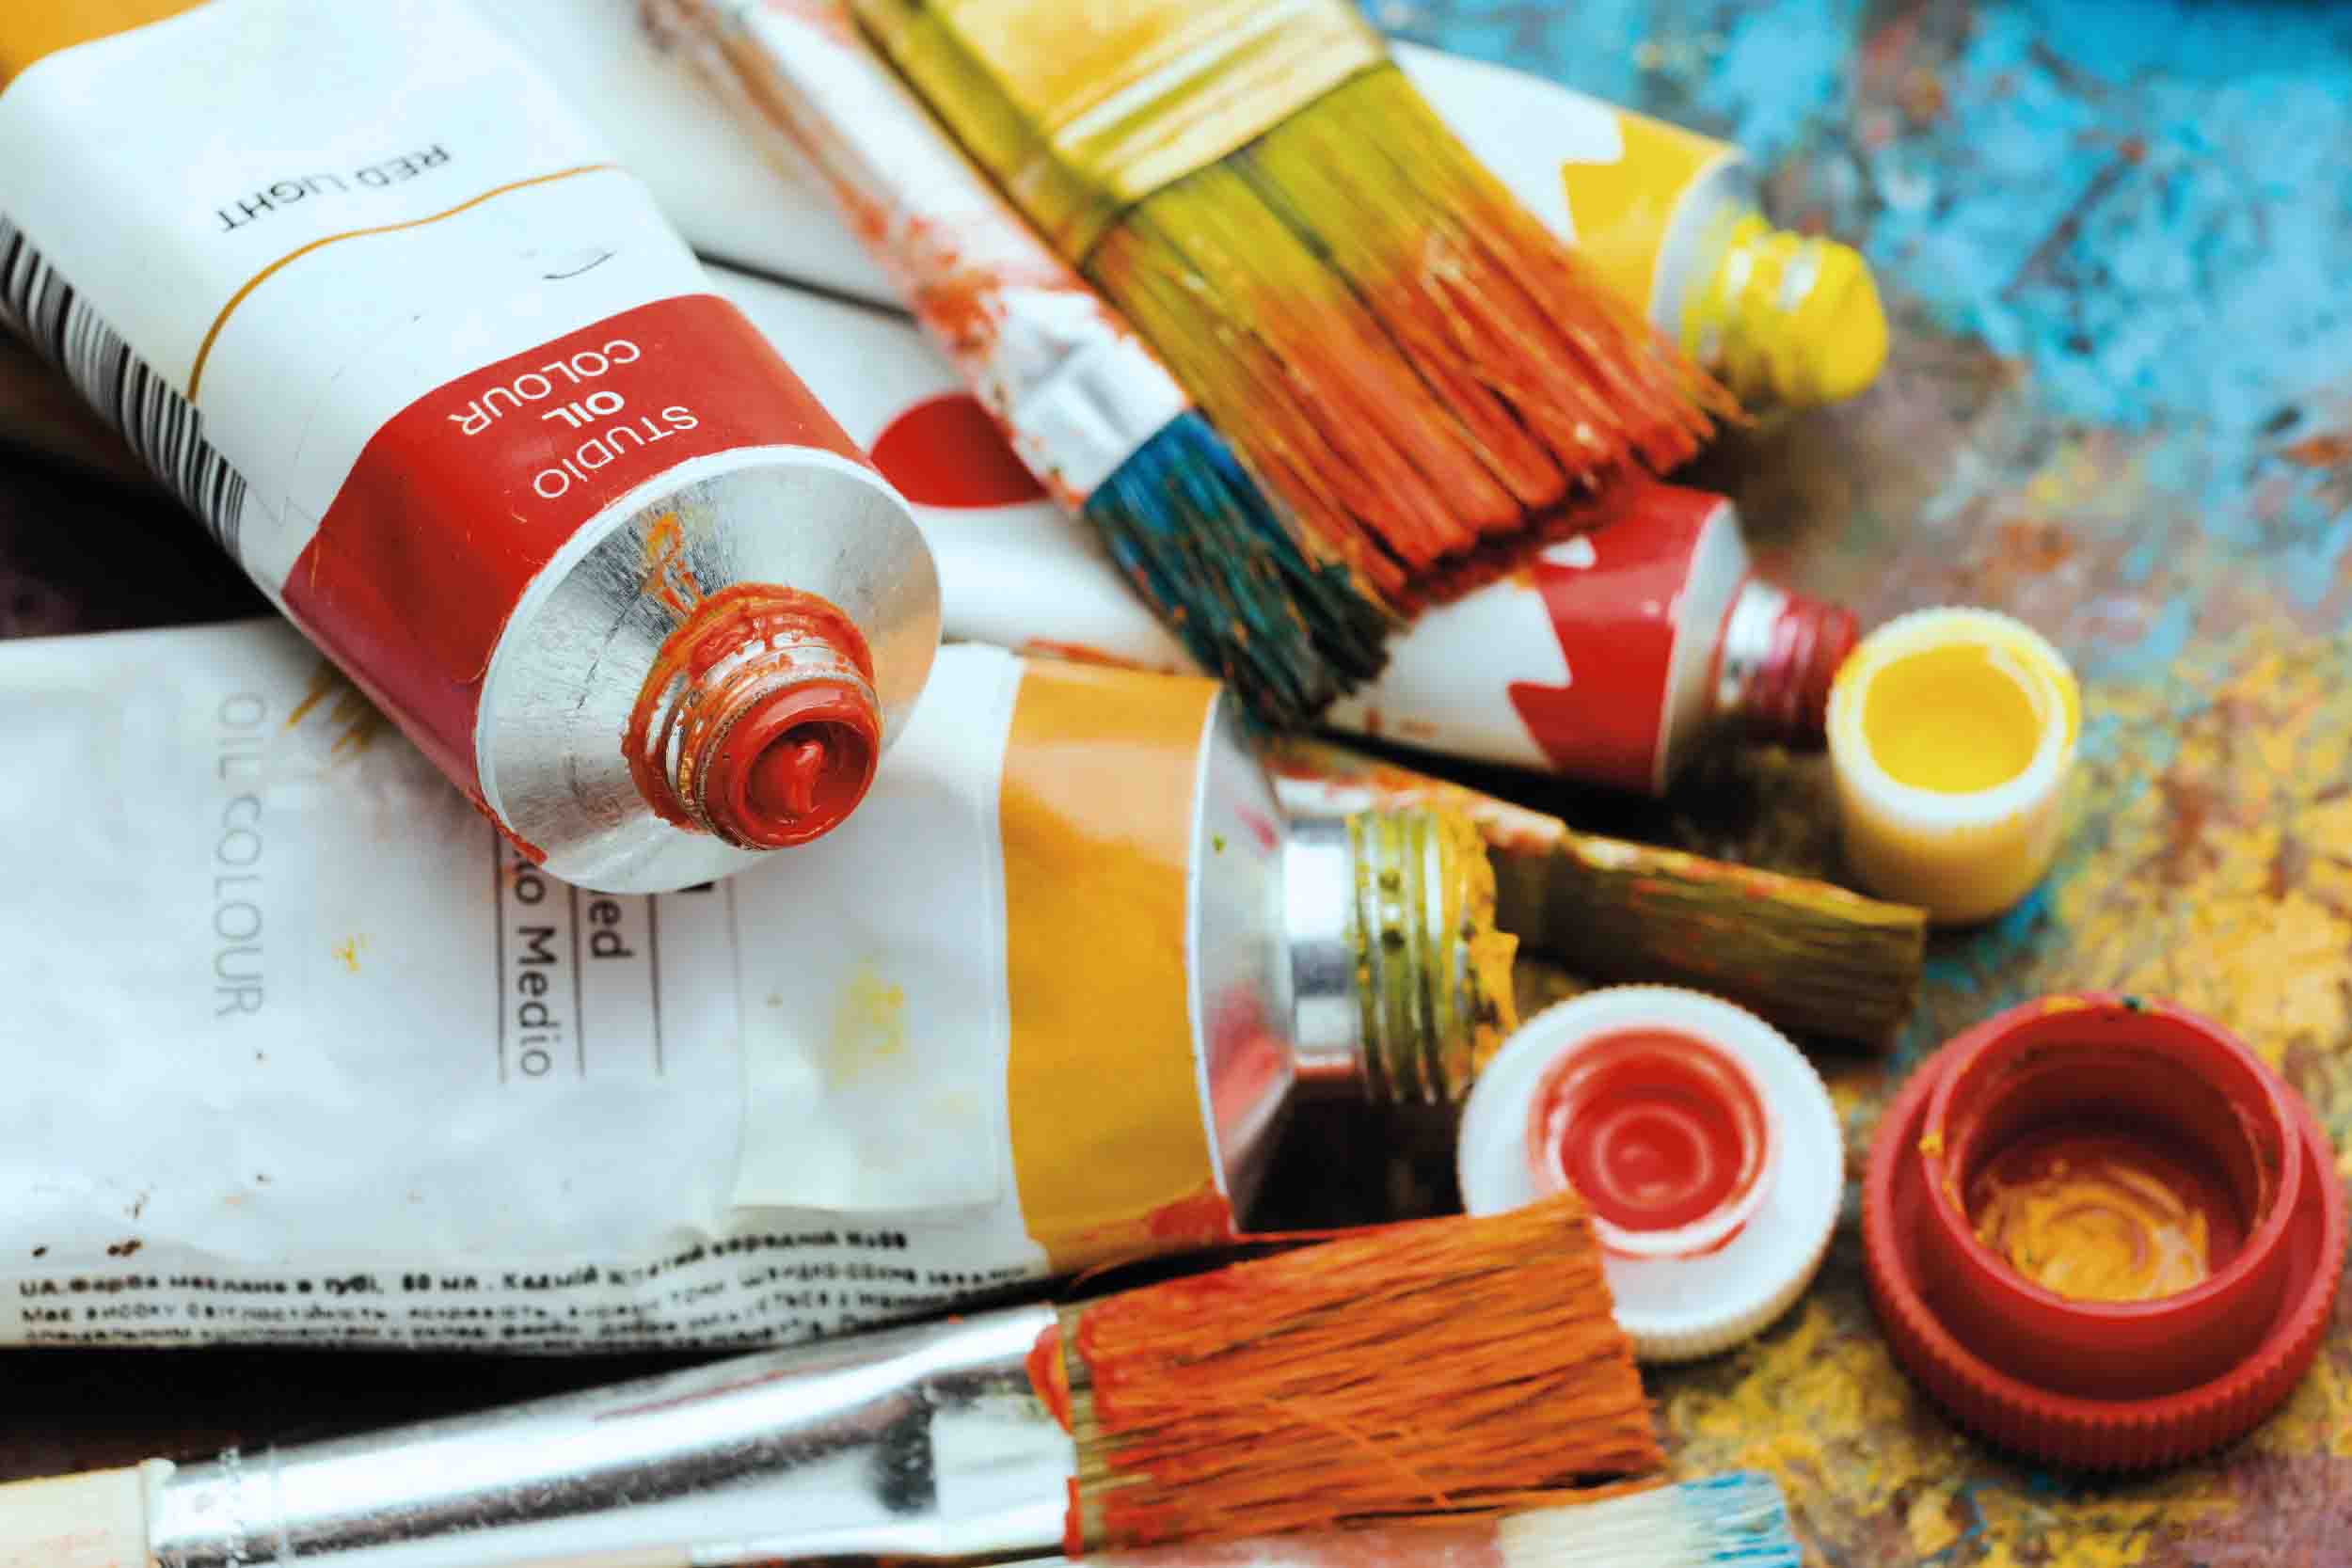 Accessories, materials and supplies for working with oil painting